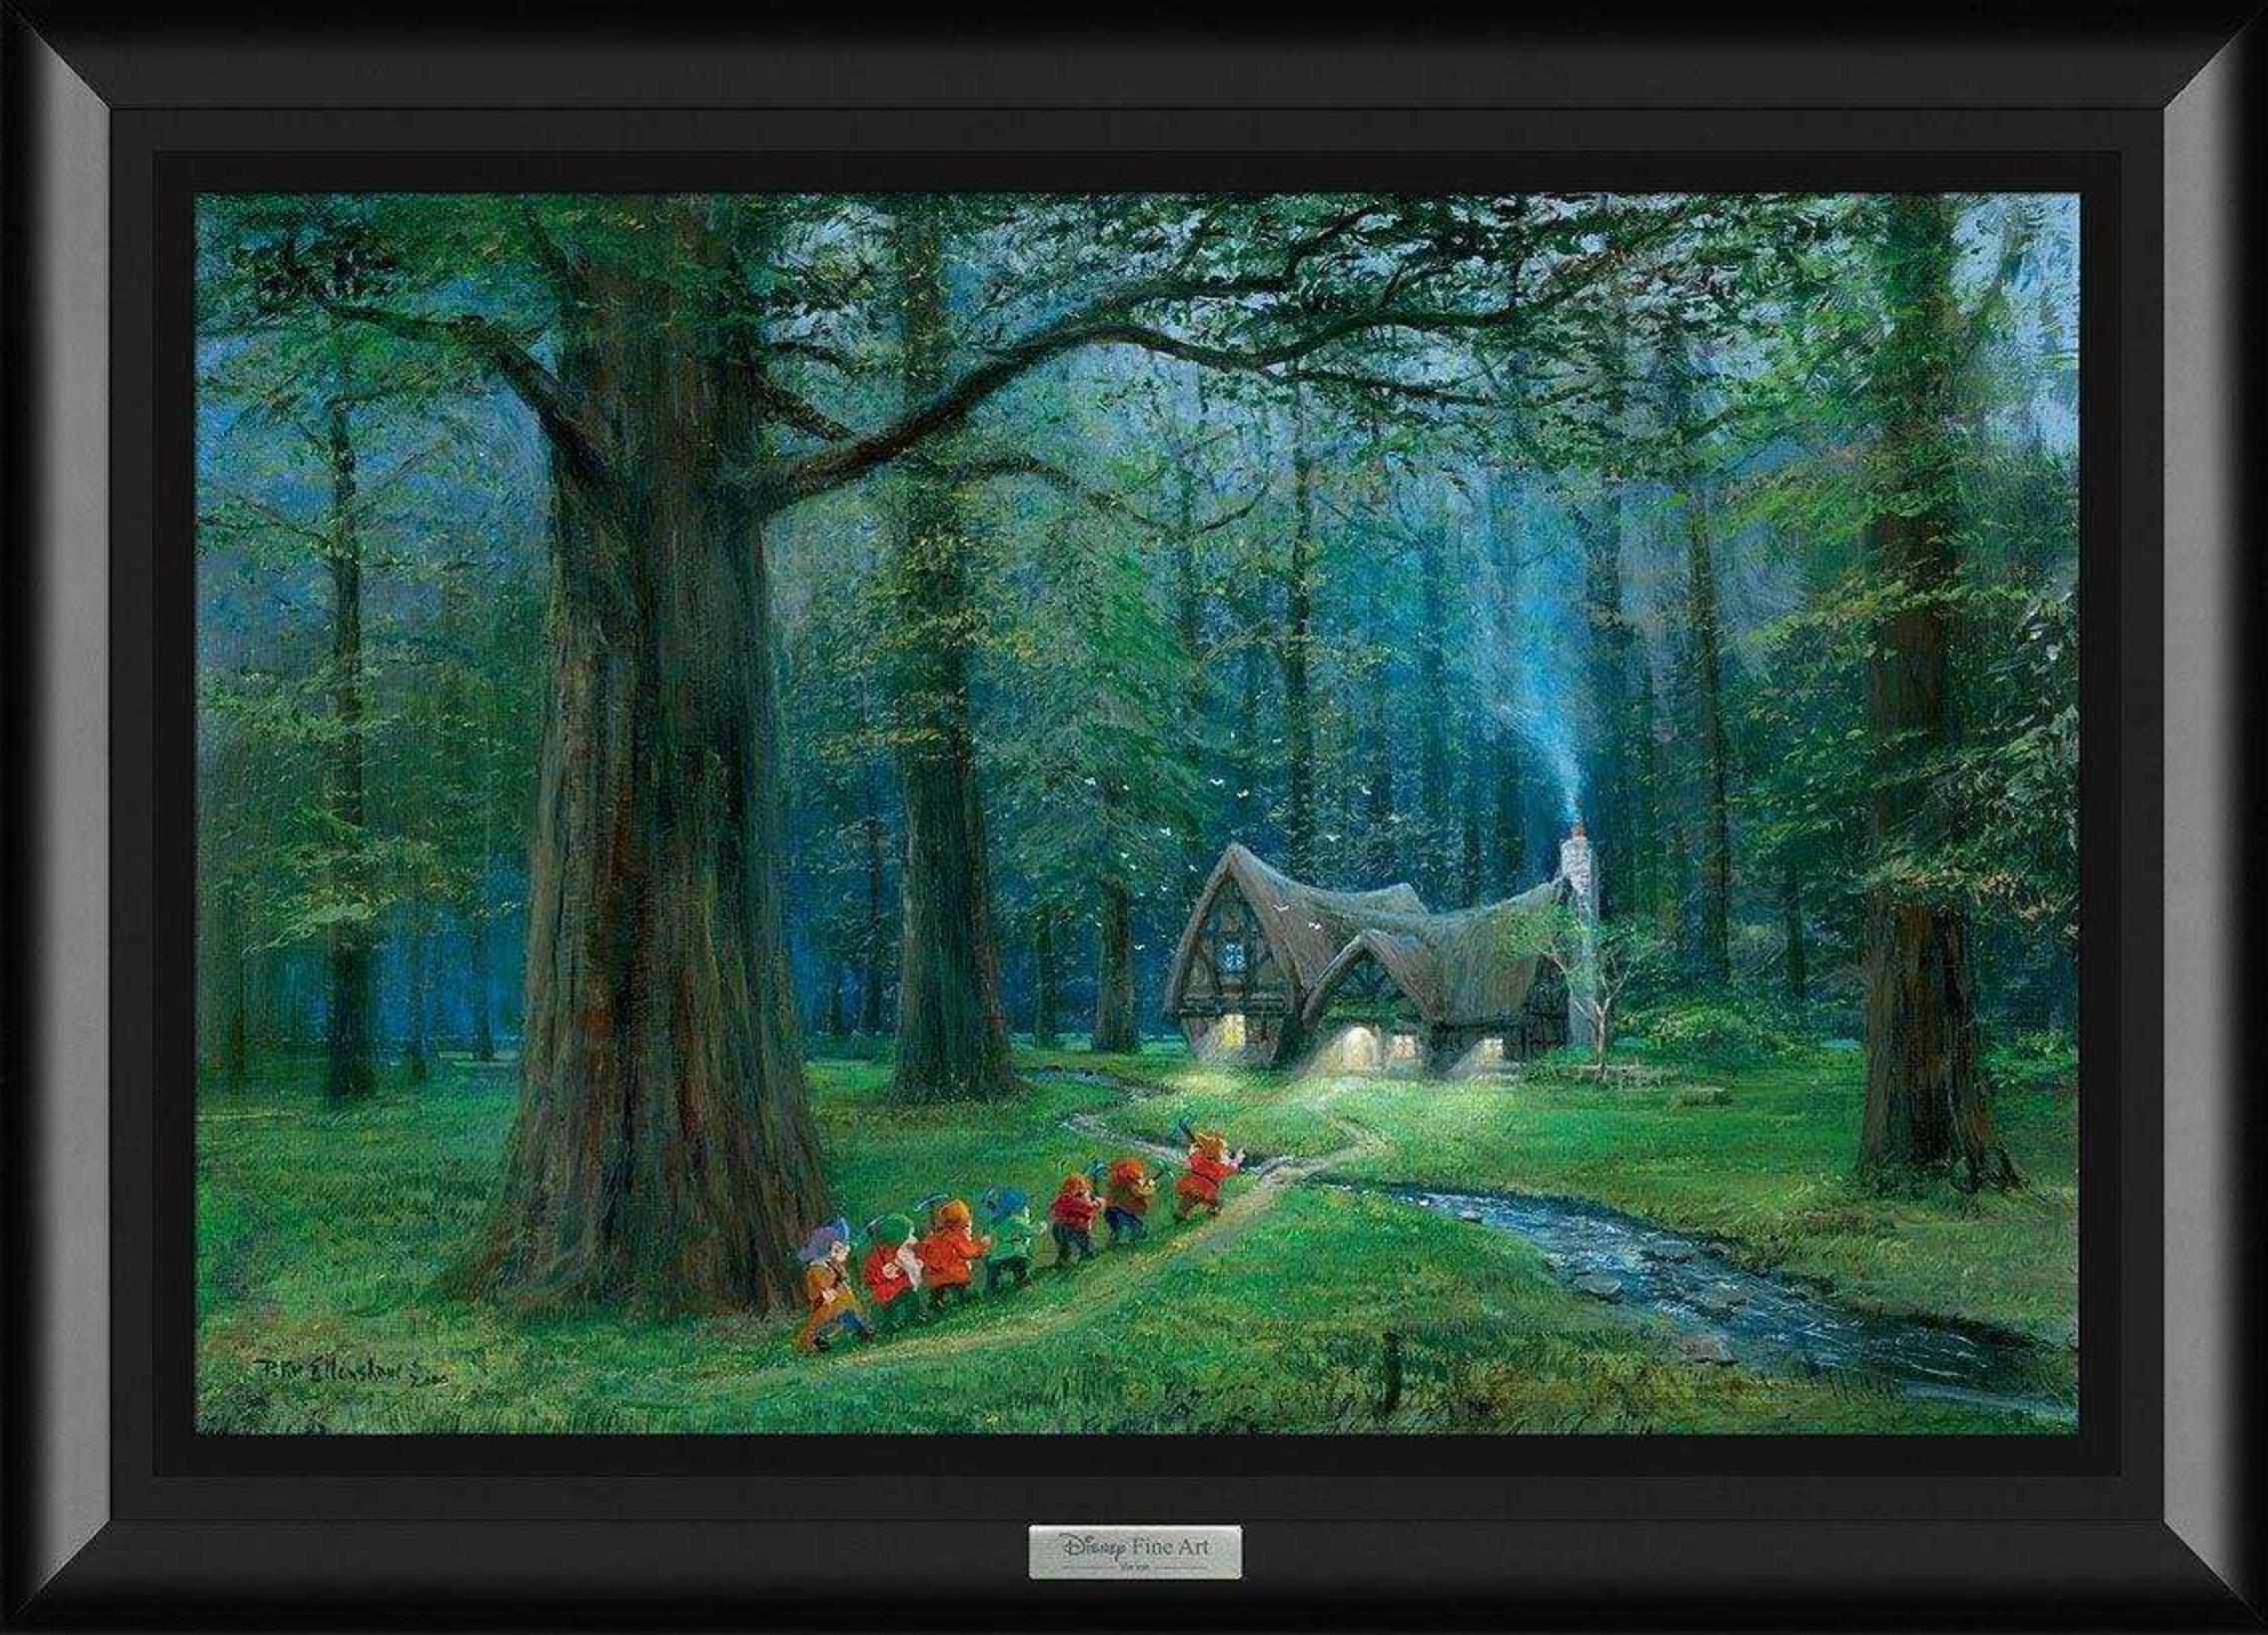 Disney Silver Series Framed: Off To Home We Go - Art by Peter Ellenshaw